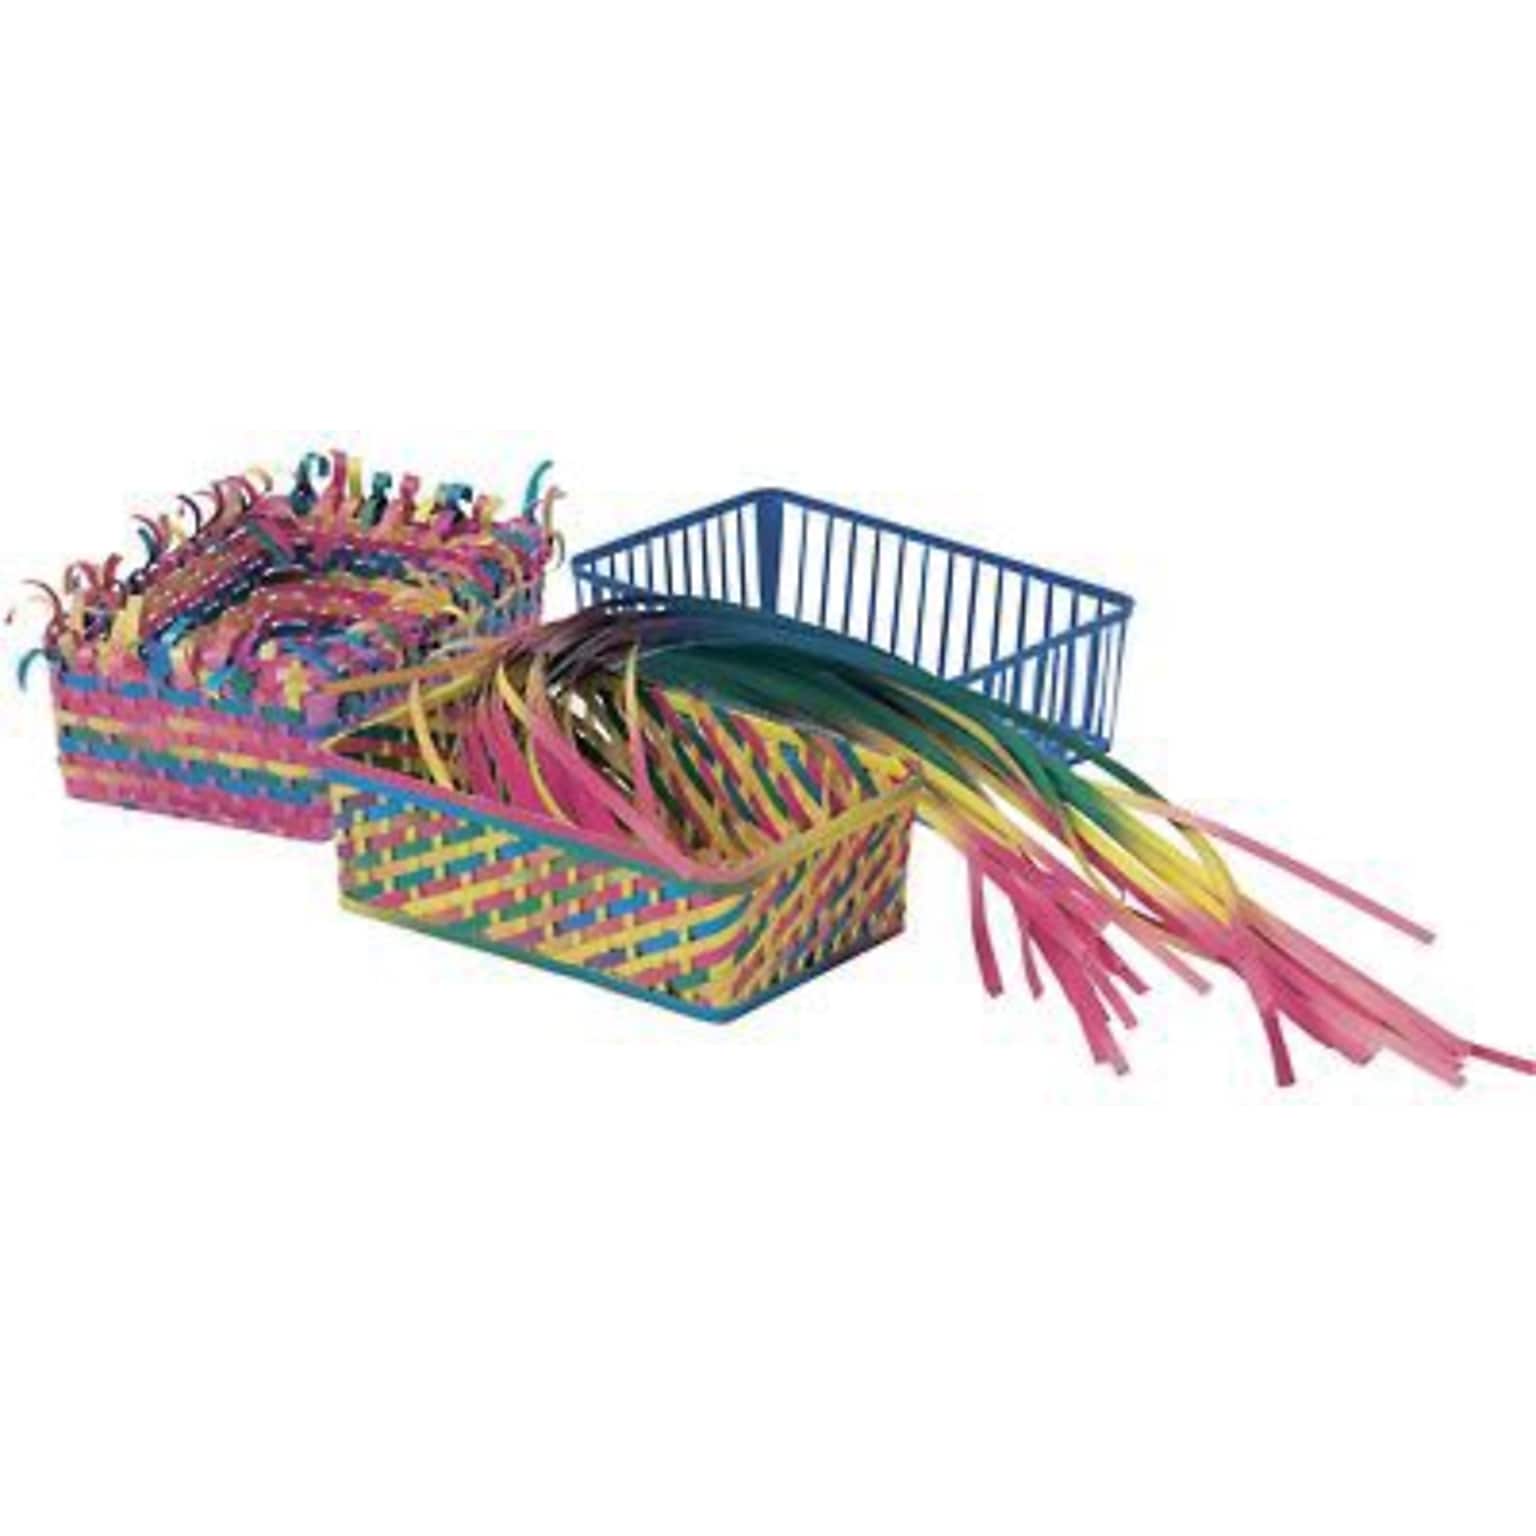 Roylco Classroom Weaving Baskets Craft Kit, 6.5 x 4.5 x 2.25, Bright Assorted Colors, 150 Strips (R-16003)